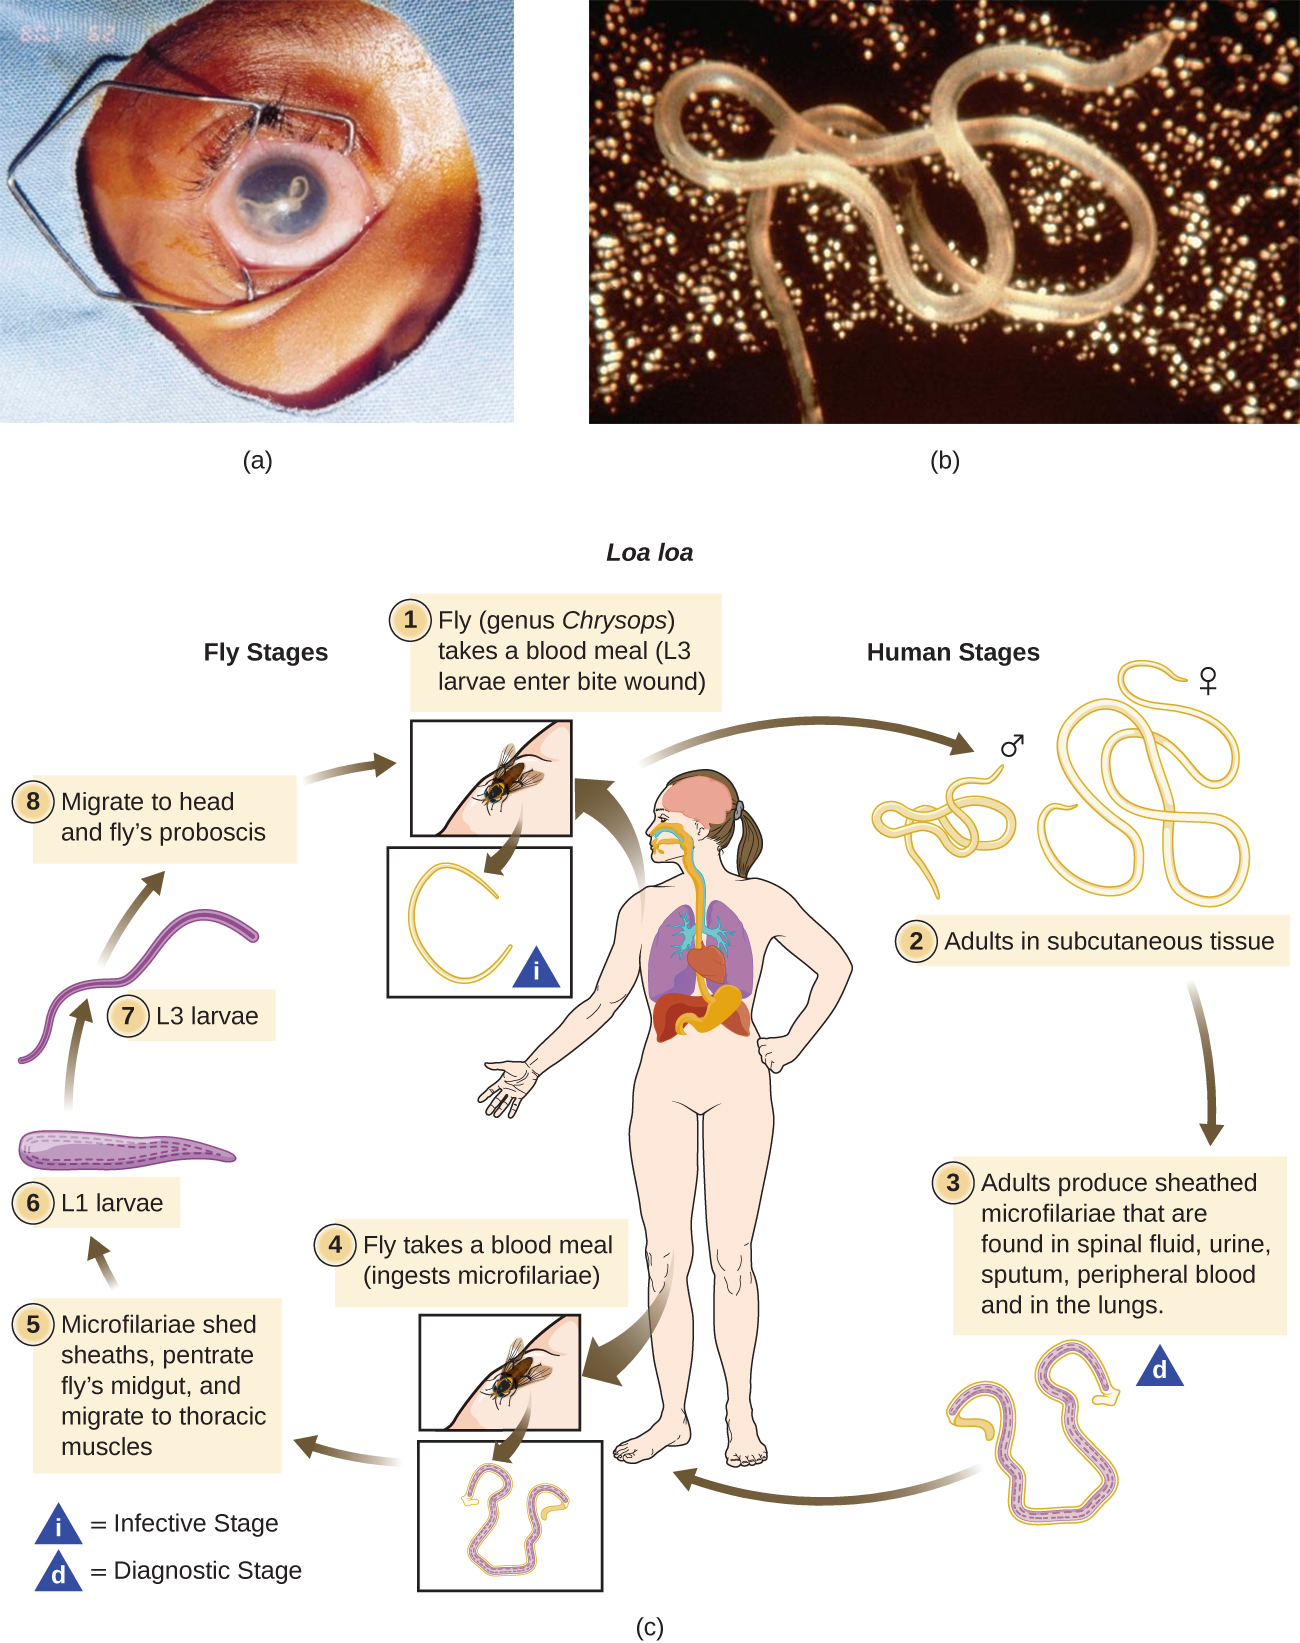 The first part of the image is a photograph of an eye with a visible worm inside of it and a photo of a close-up of the worm. The second image is a illustrated chart showing the Life cycle of Lao lao. Fly (genus Chrysops) takes a blood meal (L3 larvae enter the bite wound). Adults grow into long worms in the subcutaneous tissue. Adults produce sheathed microfilariae that are found in spinal fluid, urine, sputum, peripheral blood, and in the lungs. Another fly take a blood meal and ingests microfilariae. The microfilariae shed sheaths, penetrate fly’s midgut, and migrate to thoracic muscles. The L1 larvae forms and becomes an L3 larvae which migrates to the head and fly’s proboscis. The fly is now ready to infect another person